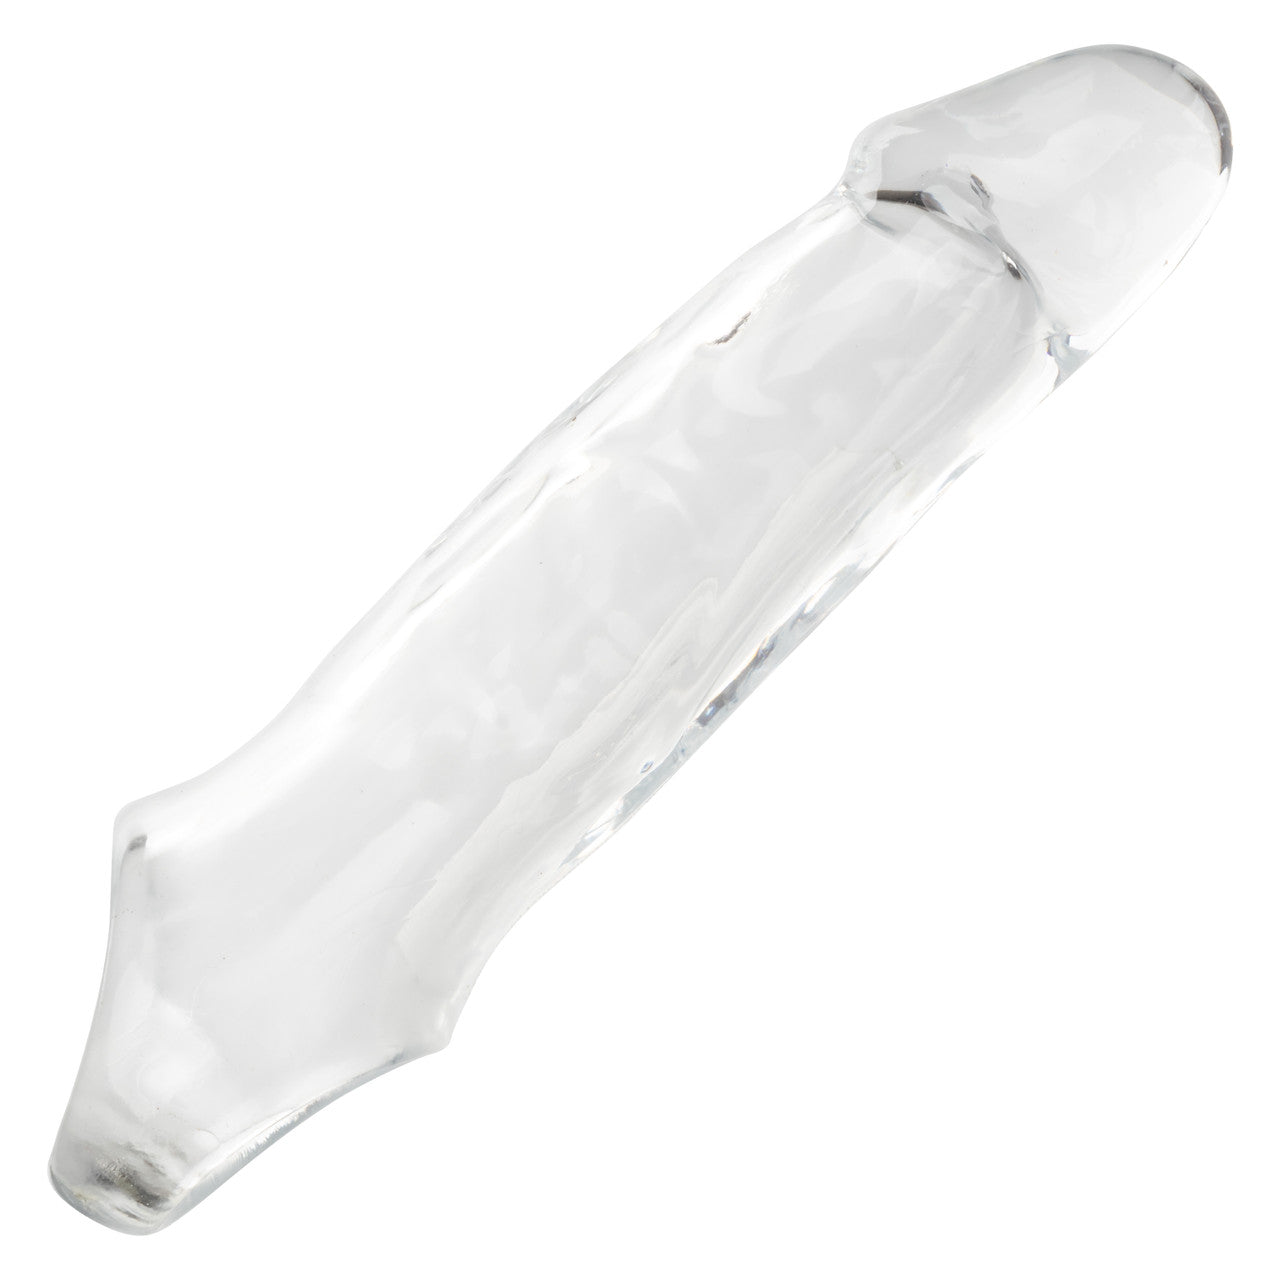 Performance Maxx Clear Extension 7.5"